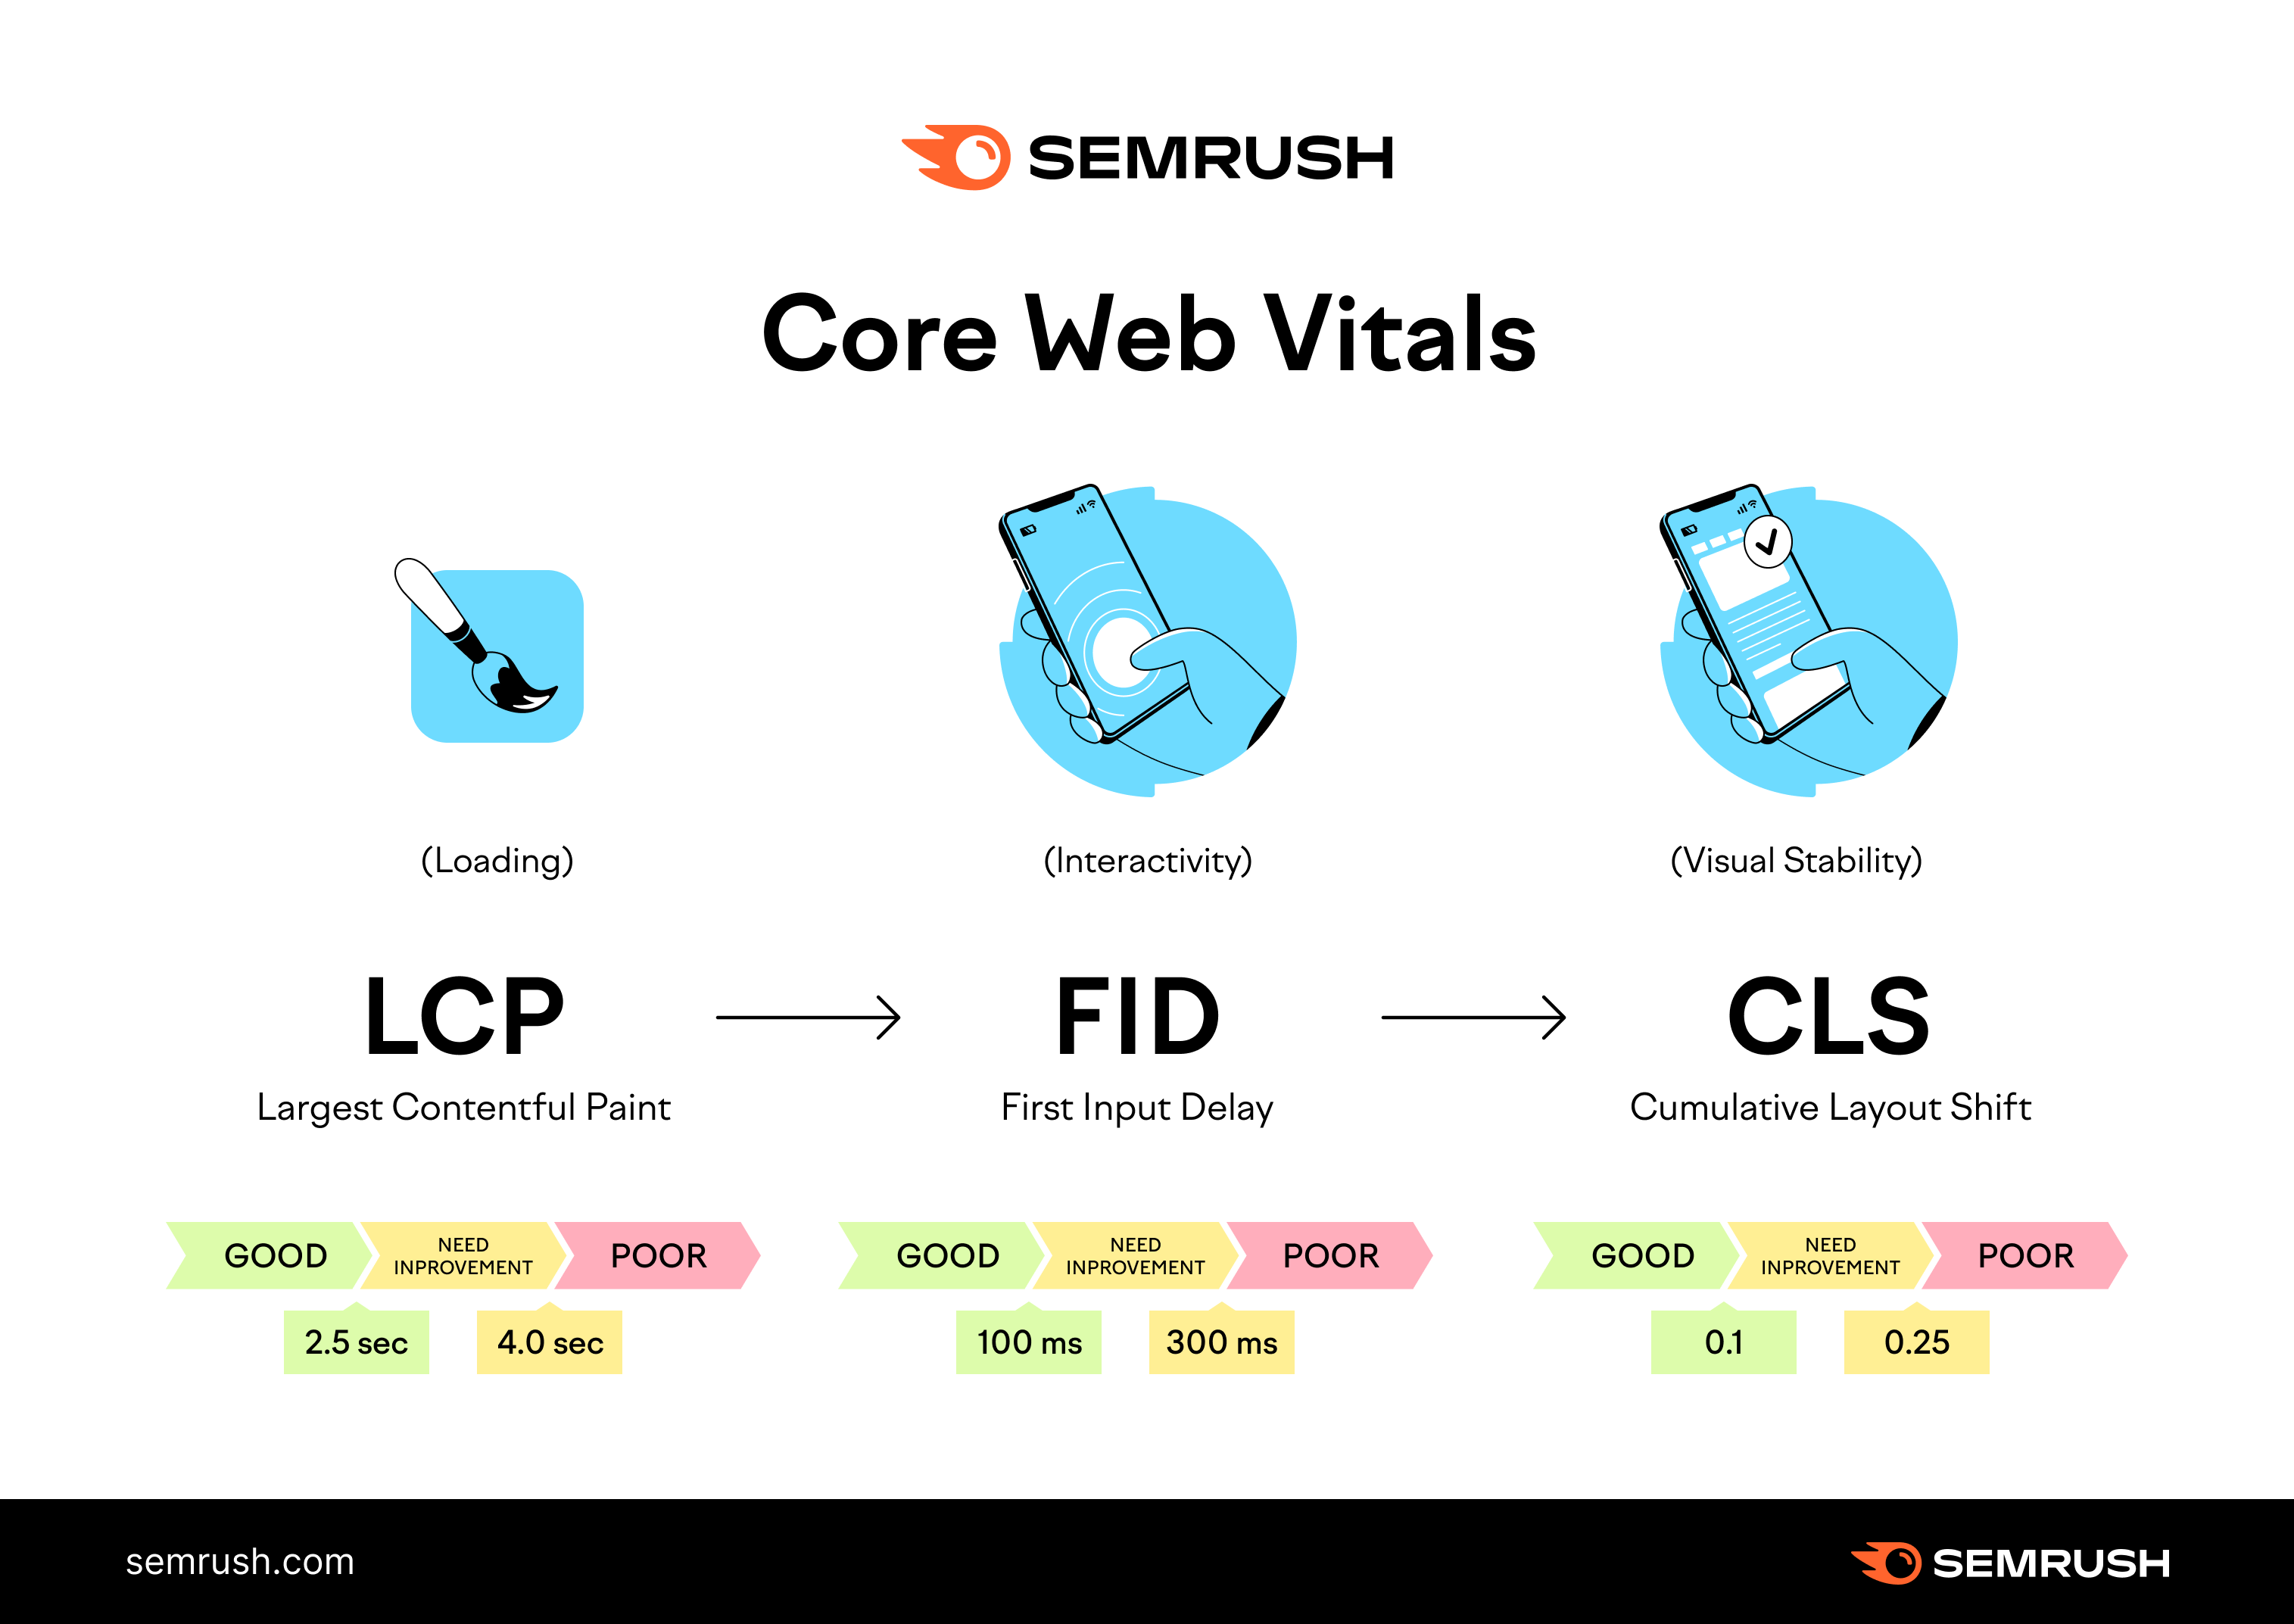 Semrush on X: "Your cheat sheet to what Core Web Vitals mean 👇 https://t.co/7bO4xRaHEw" / X